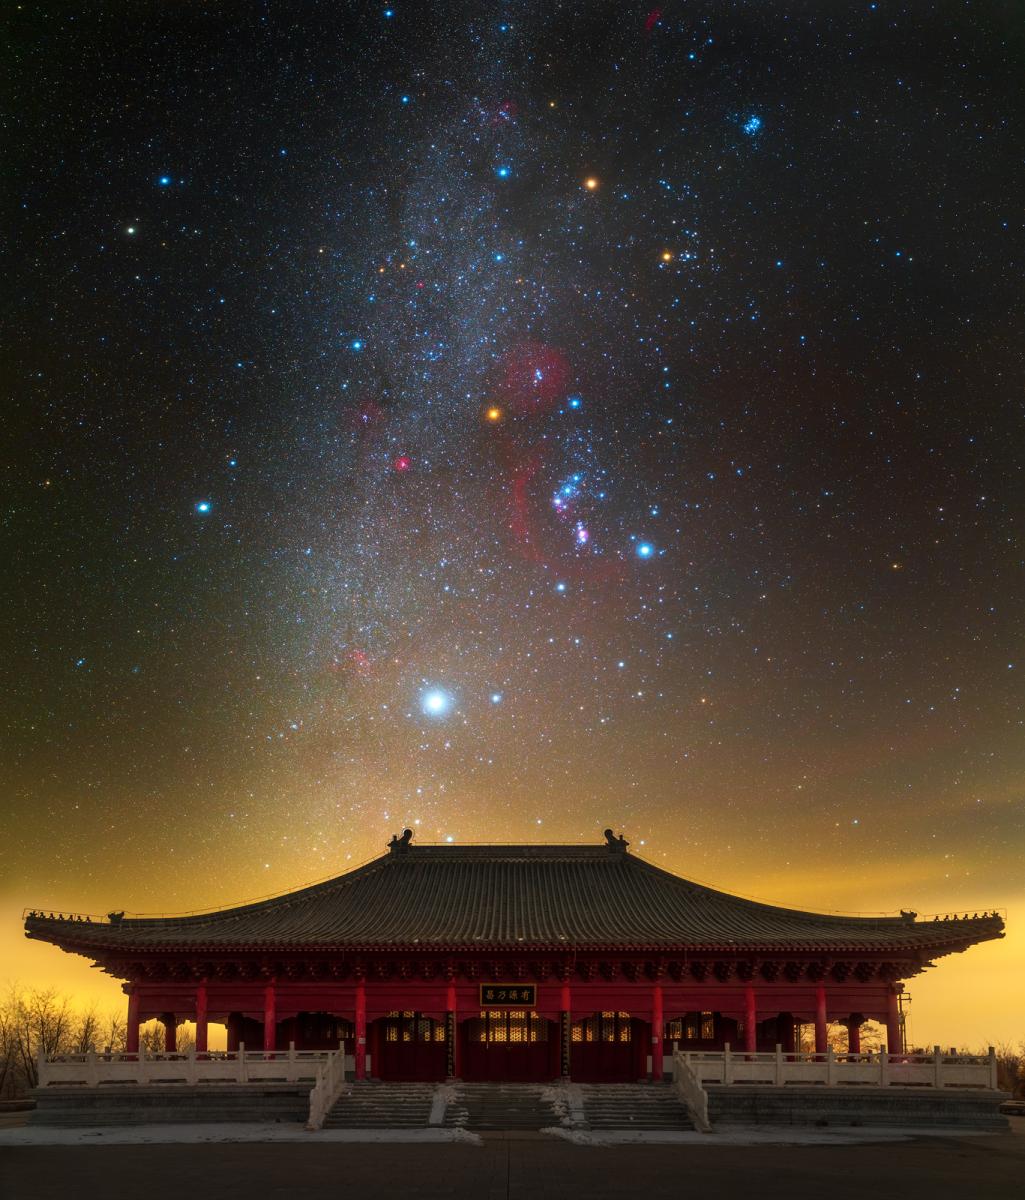 Star constellation over a temple